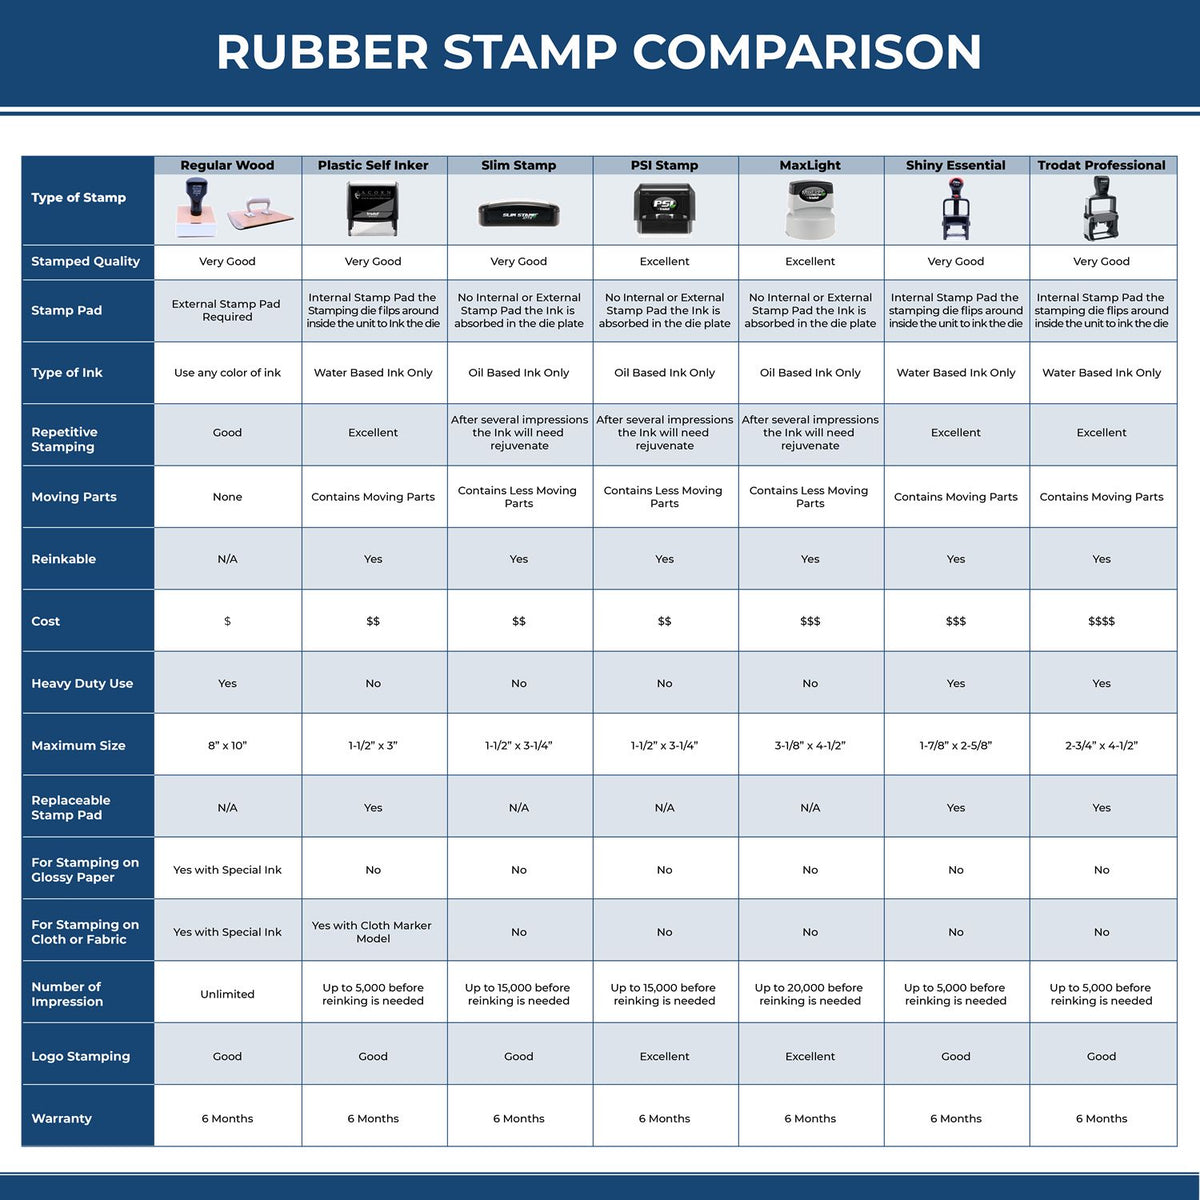 Large Self-Inking Received with In Box Stamp 4913S Rubber Stamp Comparison